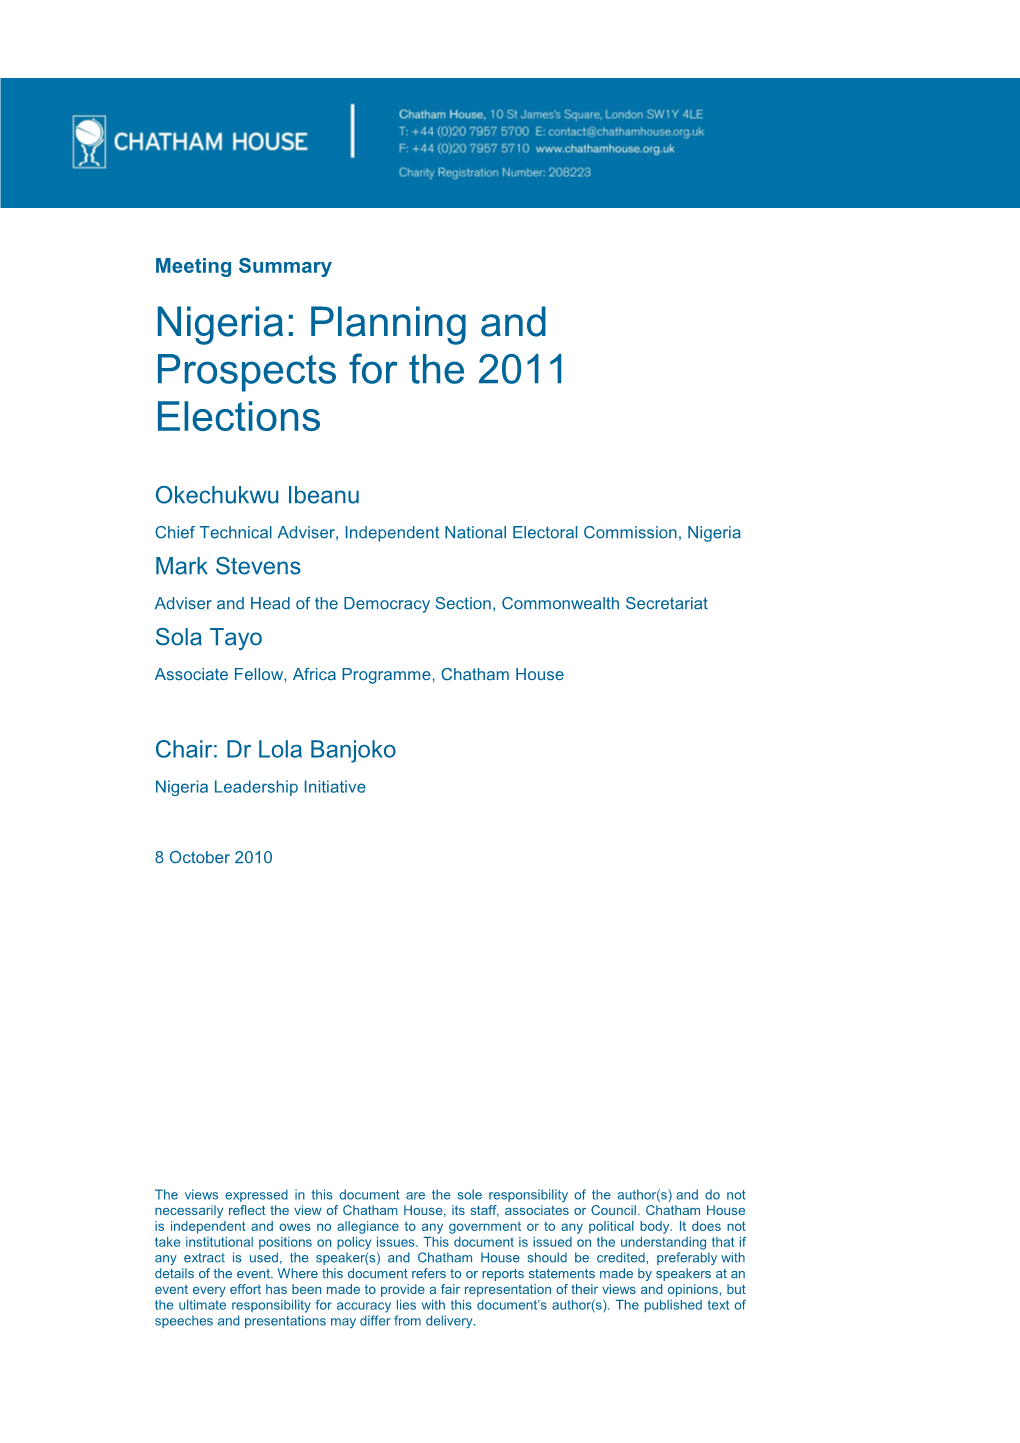 Nigeria: Planning and Prospects for the 2011 Elections